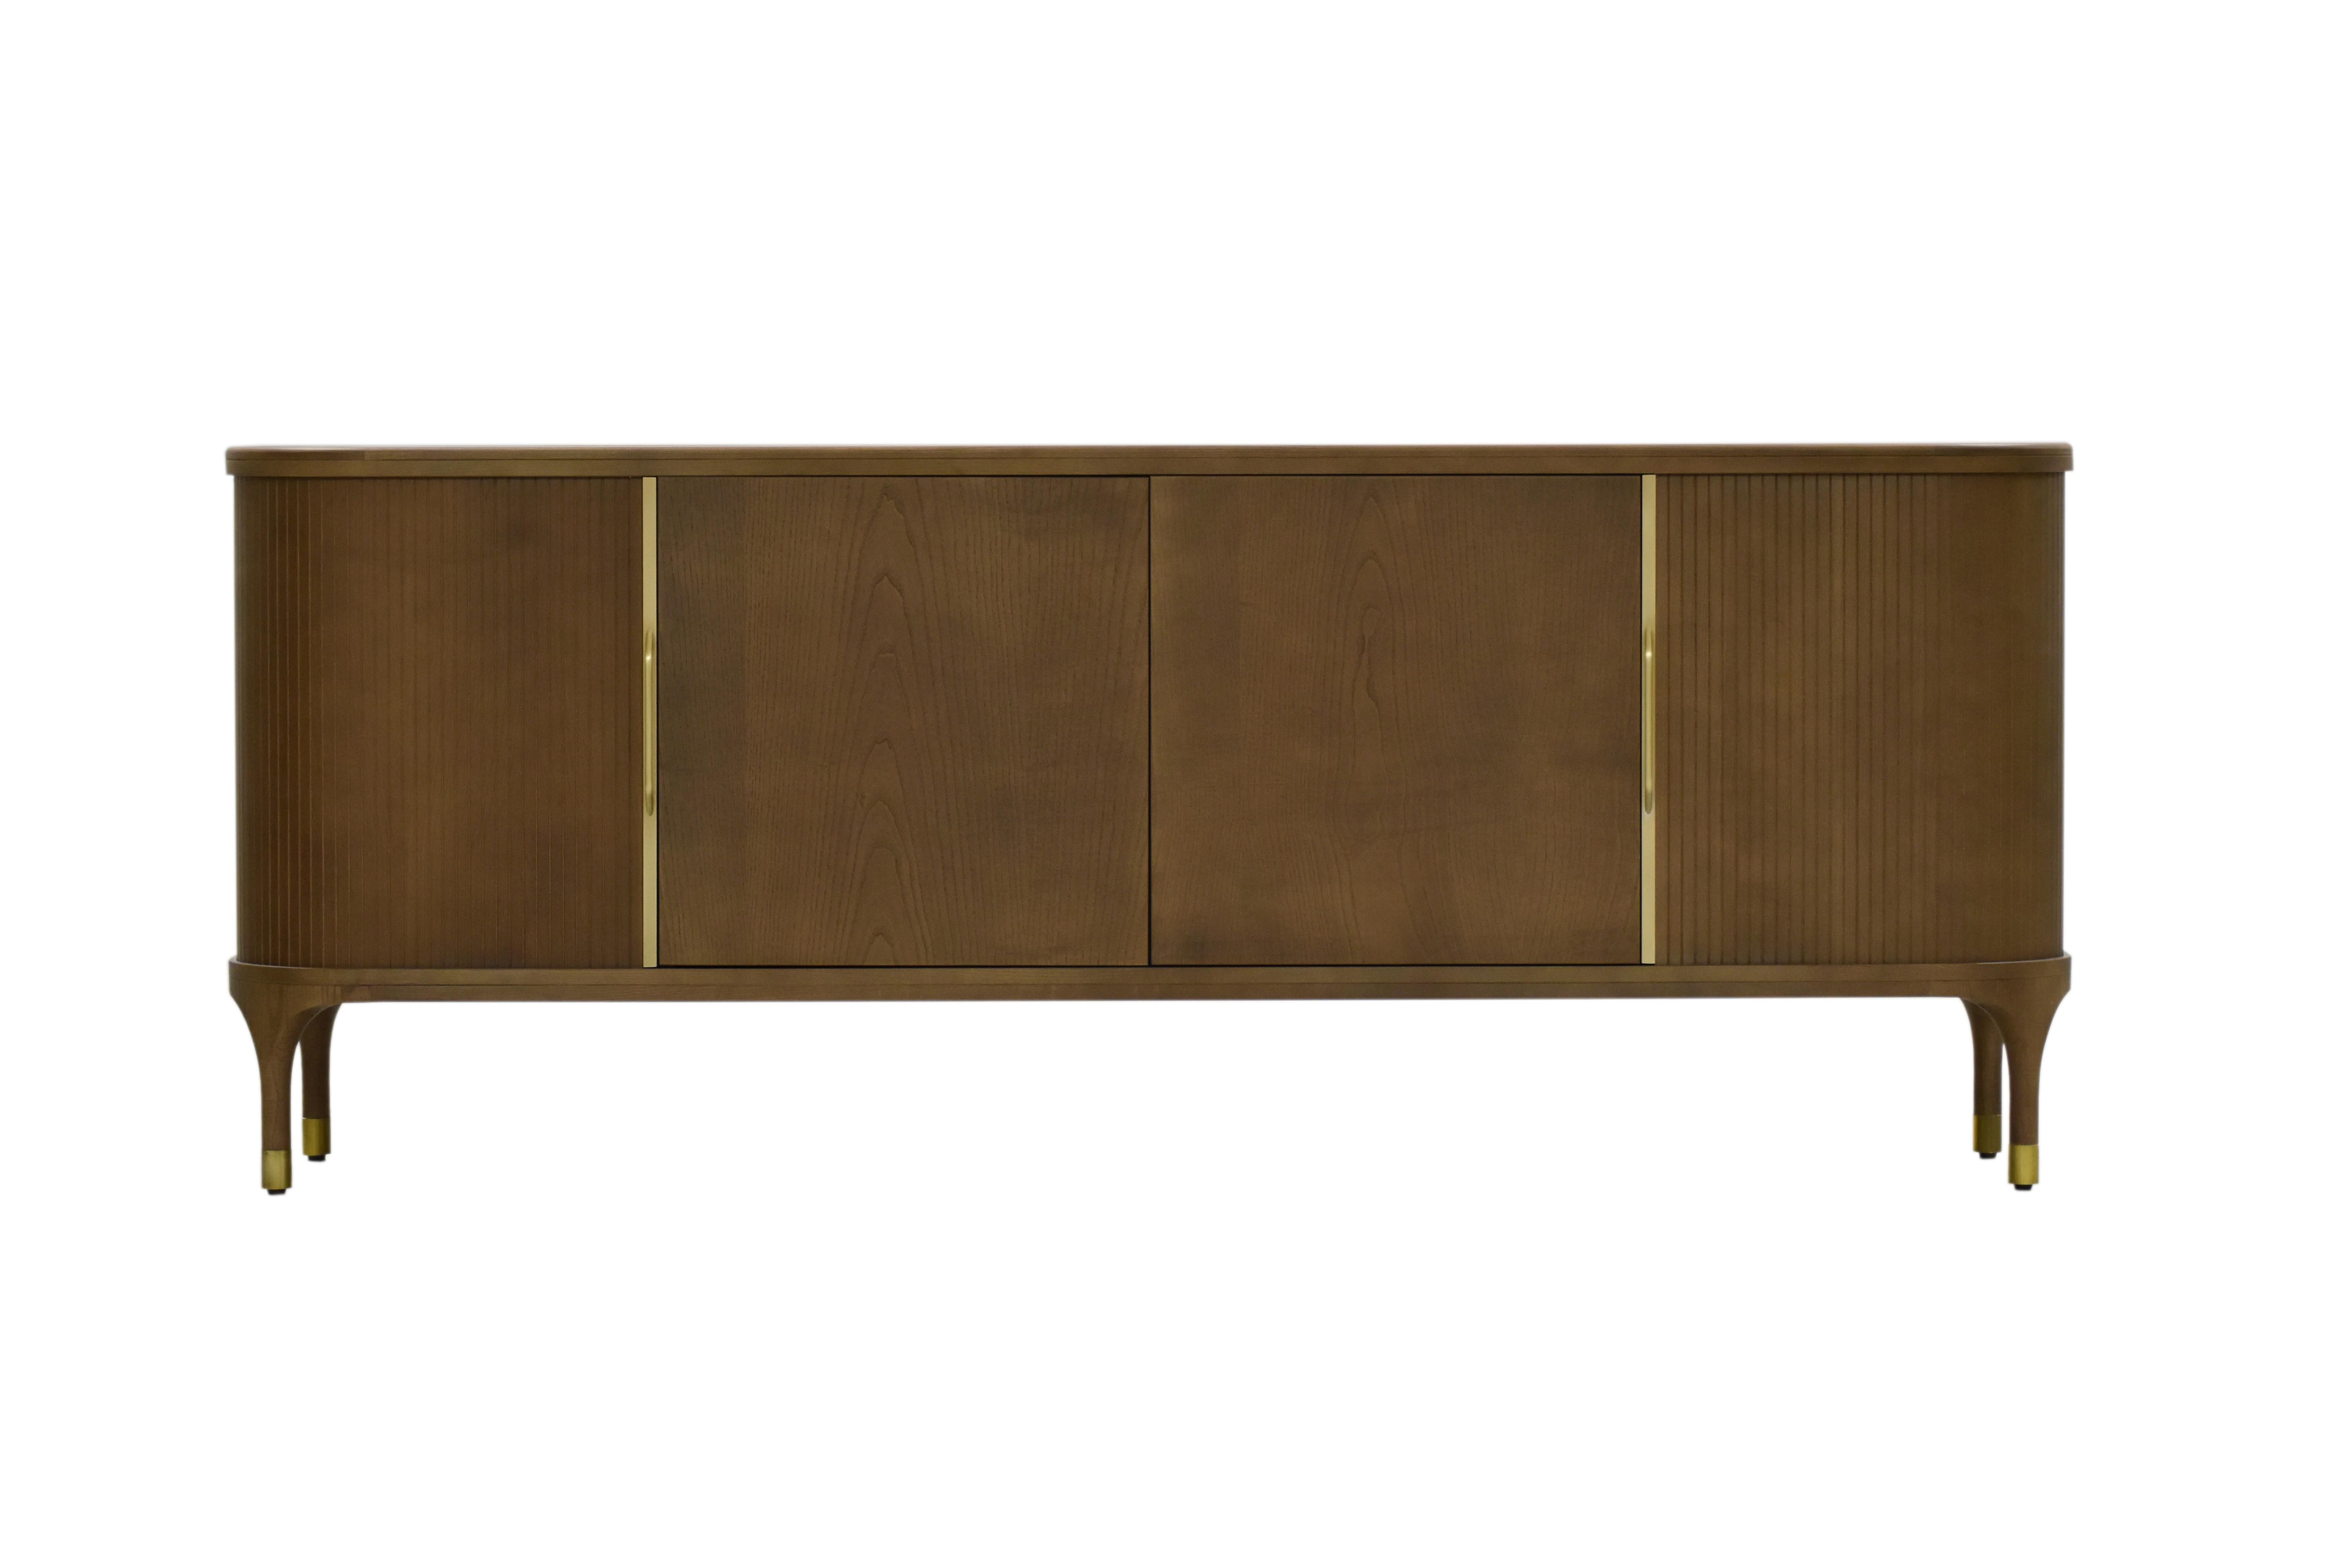 Joyce Contemporary Sideboards in Ashwood with Sliding Doors 4